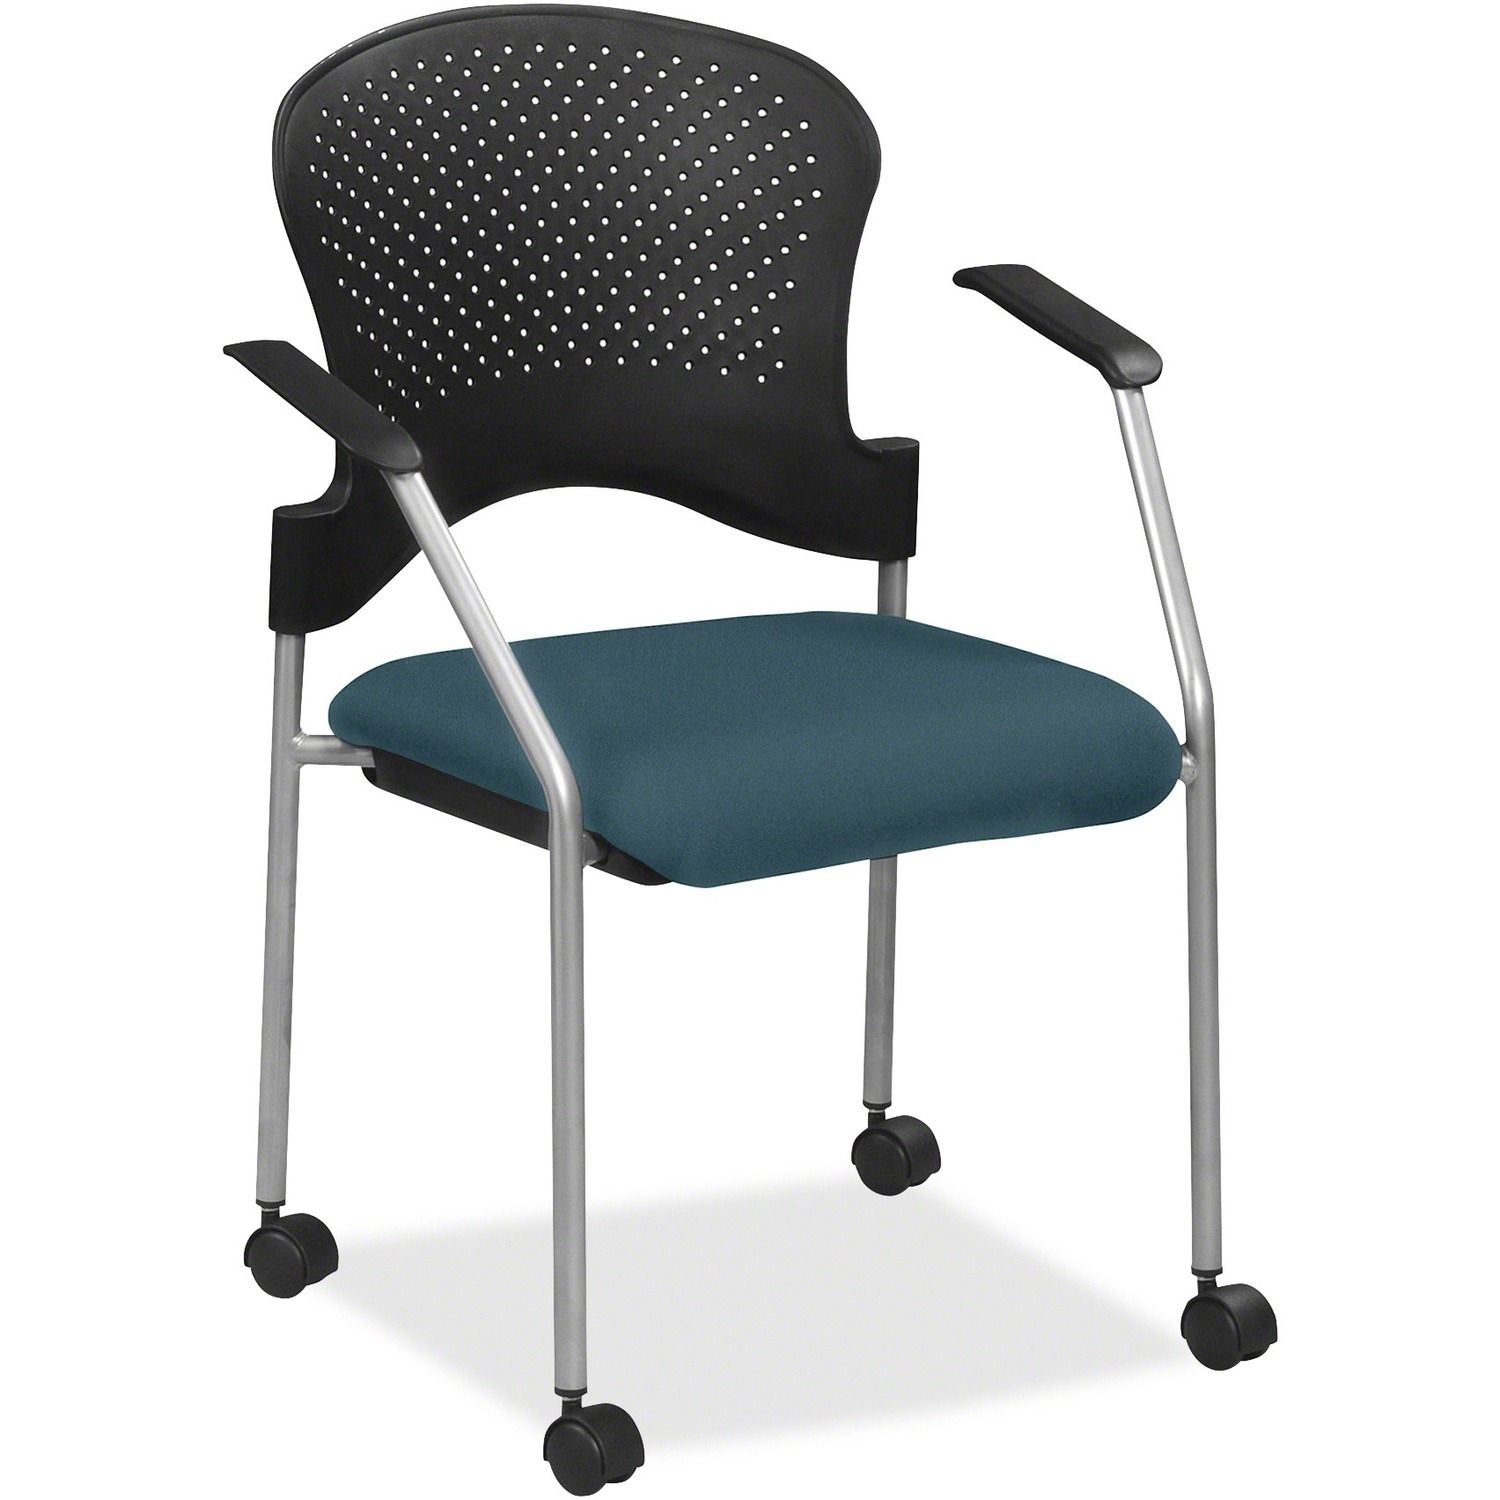 Breeze Chair with Casters Palm Fabric Seat, Palm Back, Gray Steel Frame, Four-legged Base, 1 Each